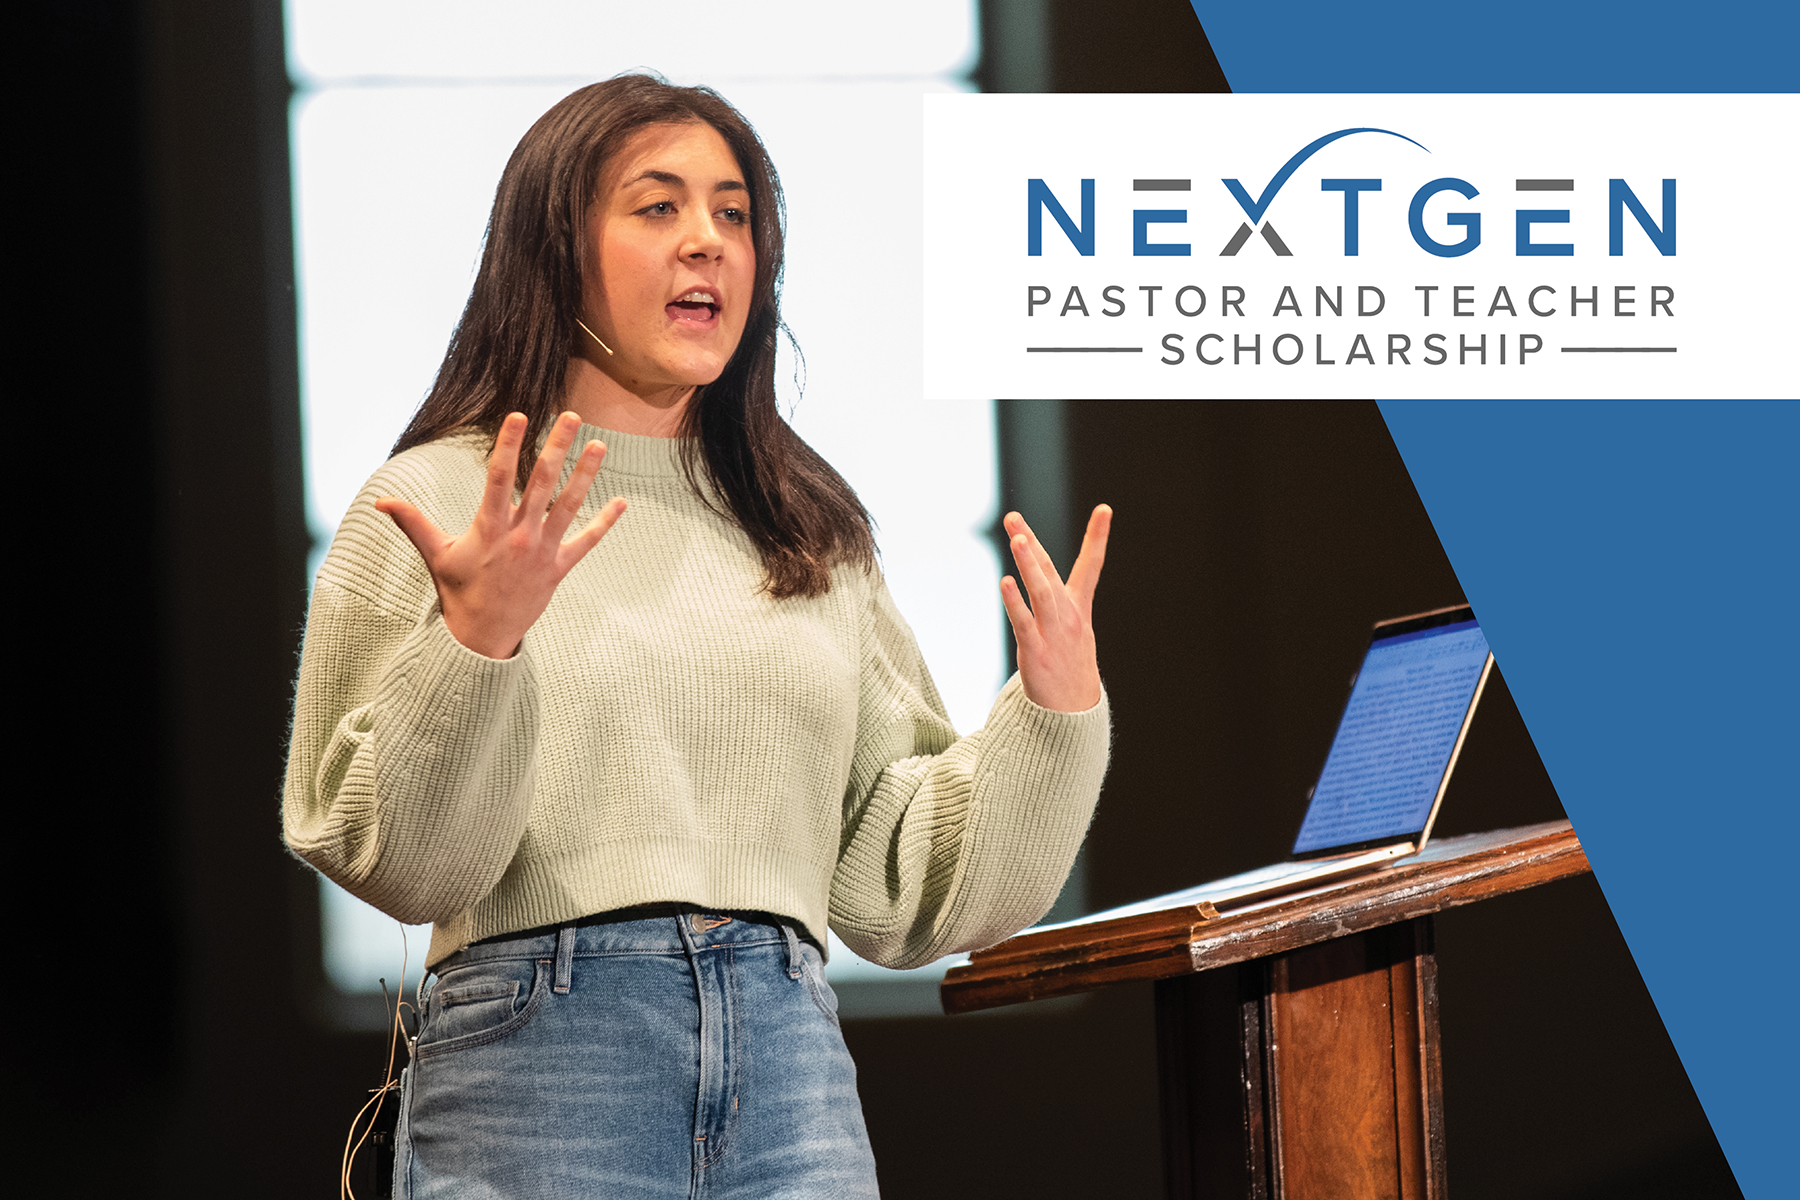 Young woman standing at a podium speaking; the words "next gen pastor and teacher scholarship" are on the photo